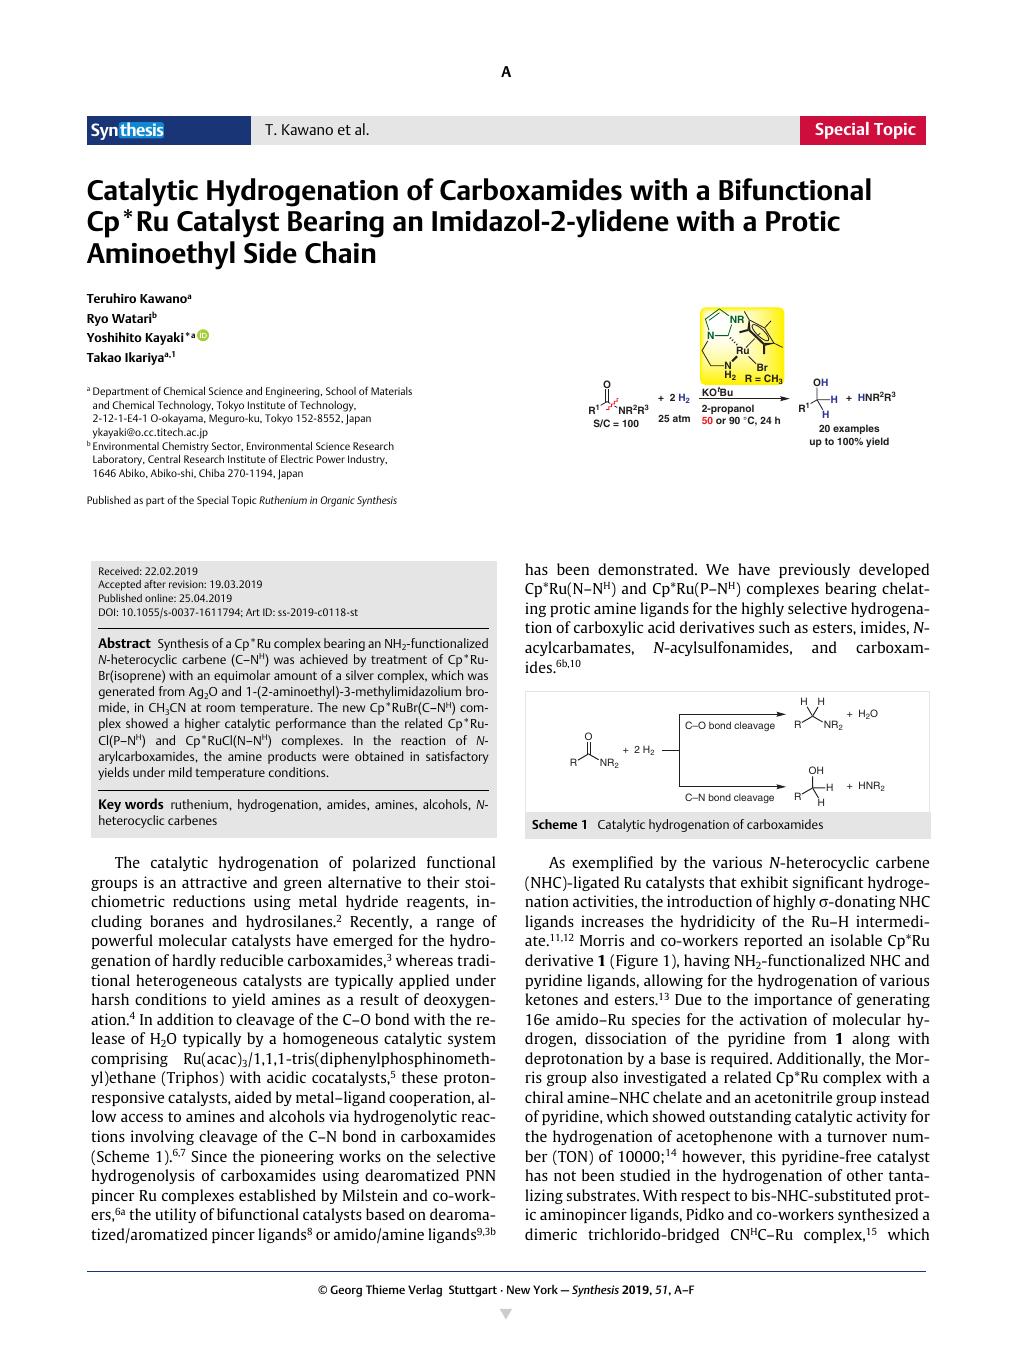 Catalytic Hydrogenation Of Carboxamides With A Bifunctional Cp Ru Catalyst Bearing An Imidazol 2 Ylidene With A Protic Aminoethyl Side Chain Synthesis X Mol